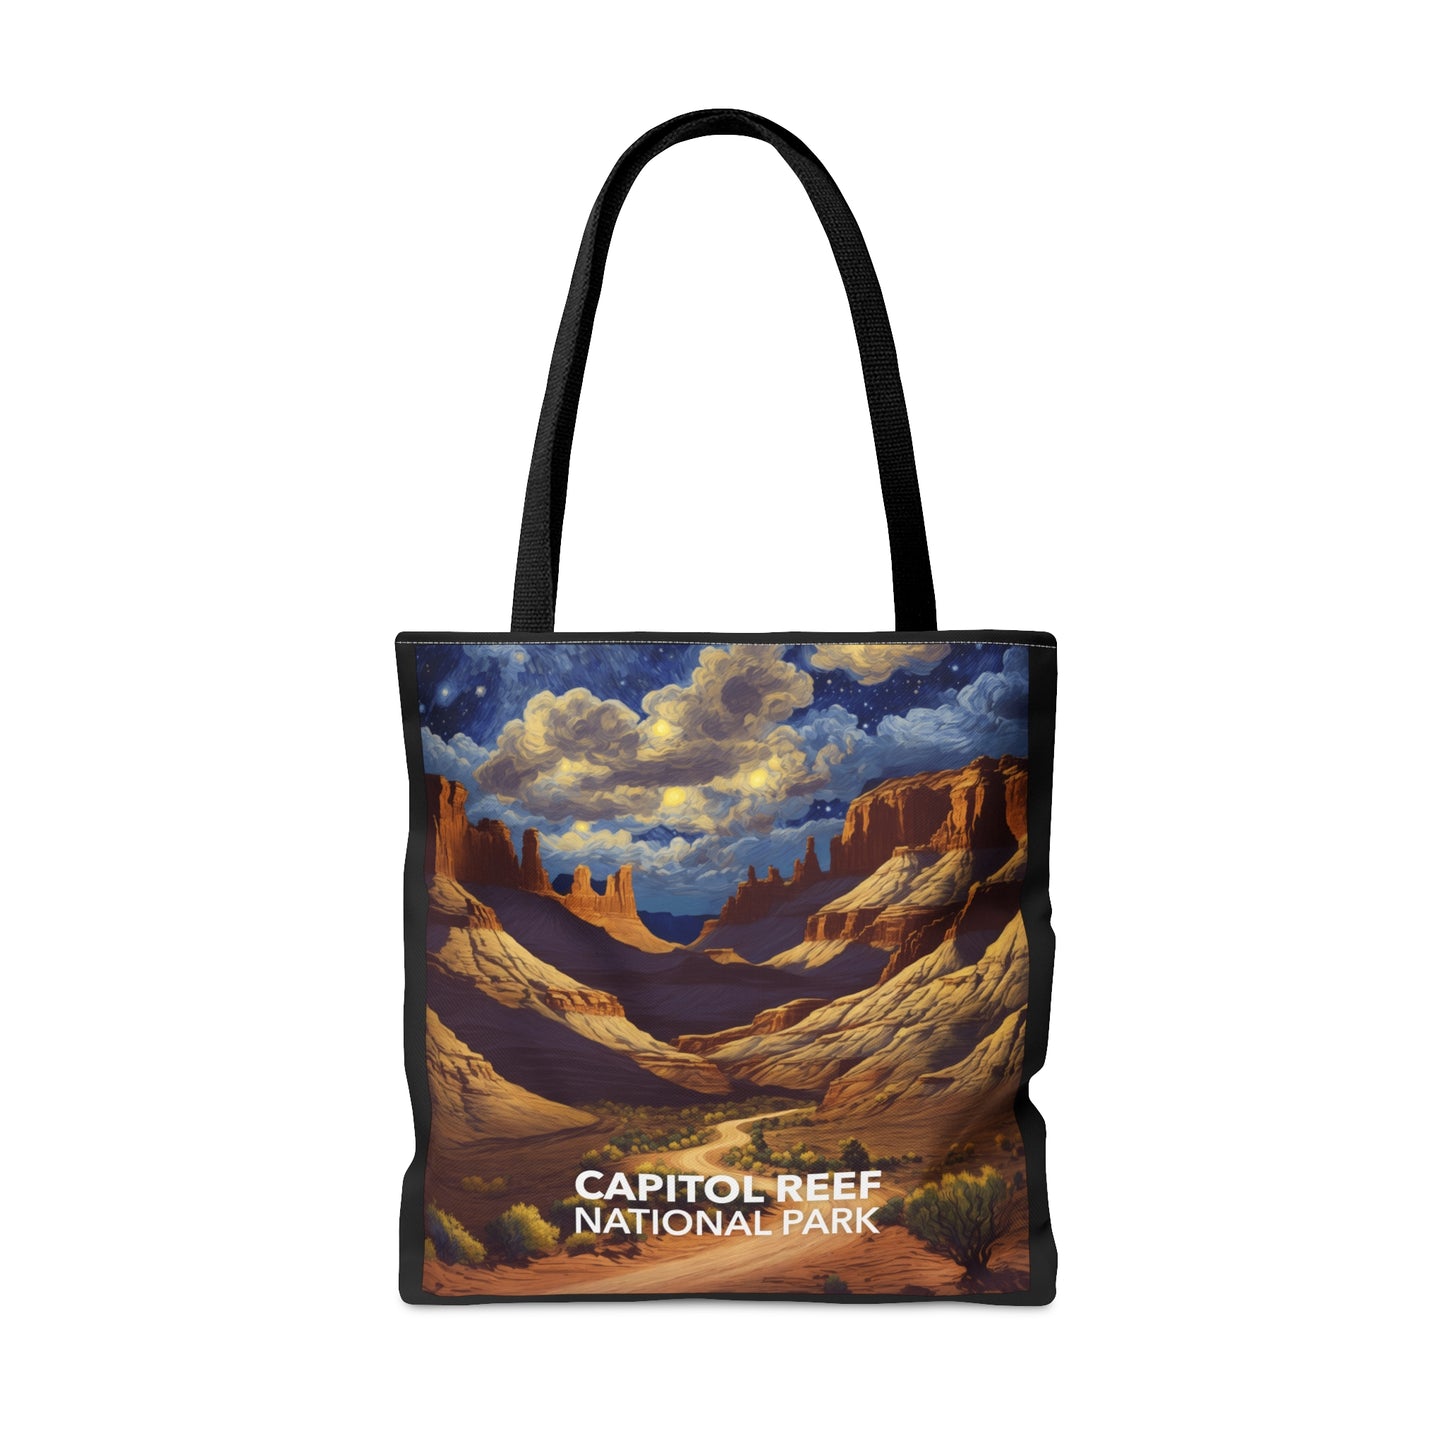 Capitol Reef National Park Tote Bag - The Starry Night